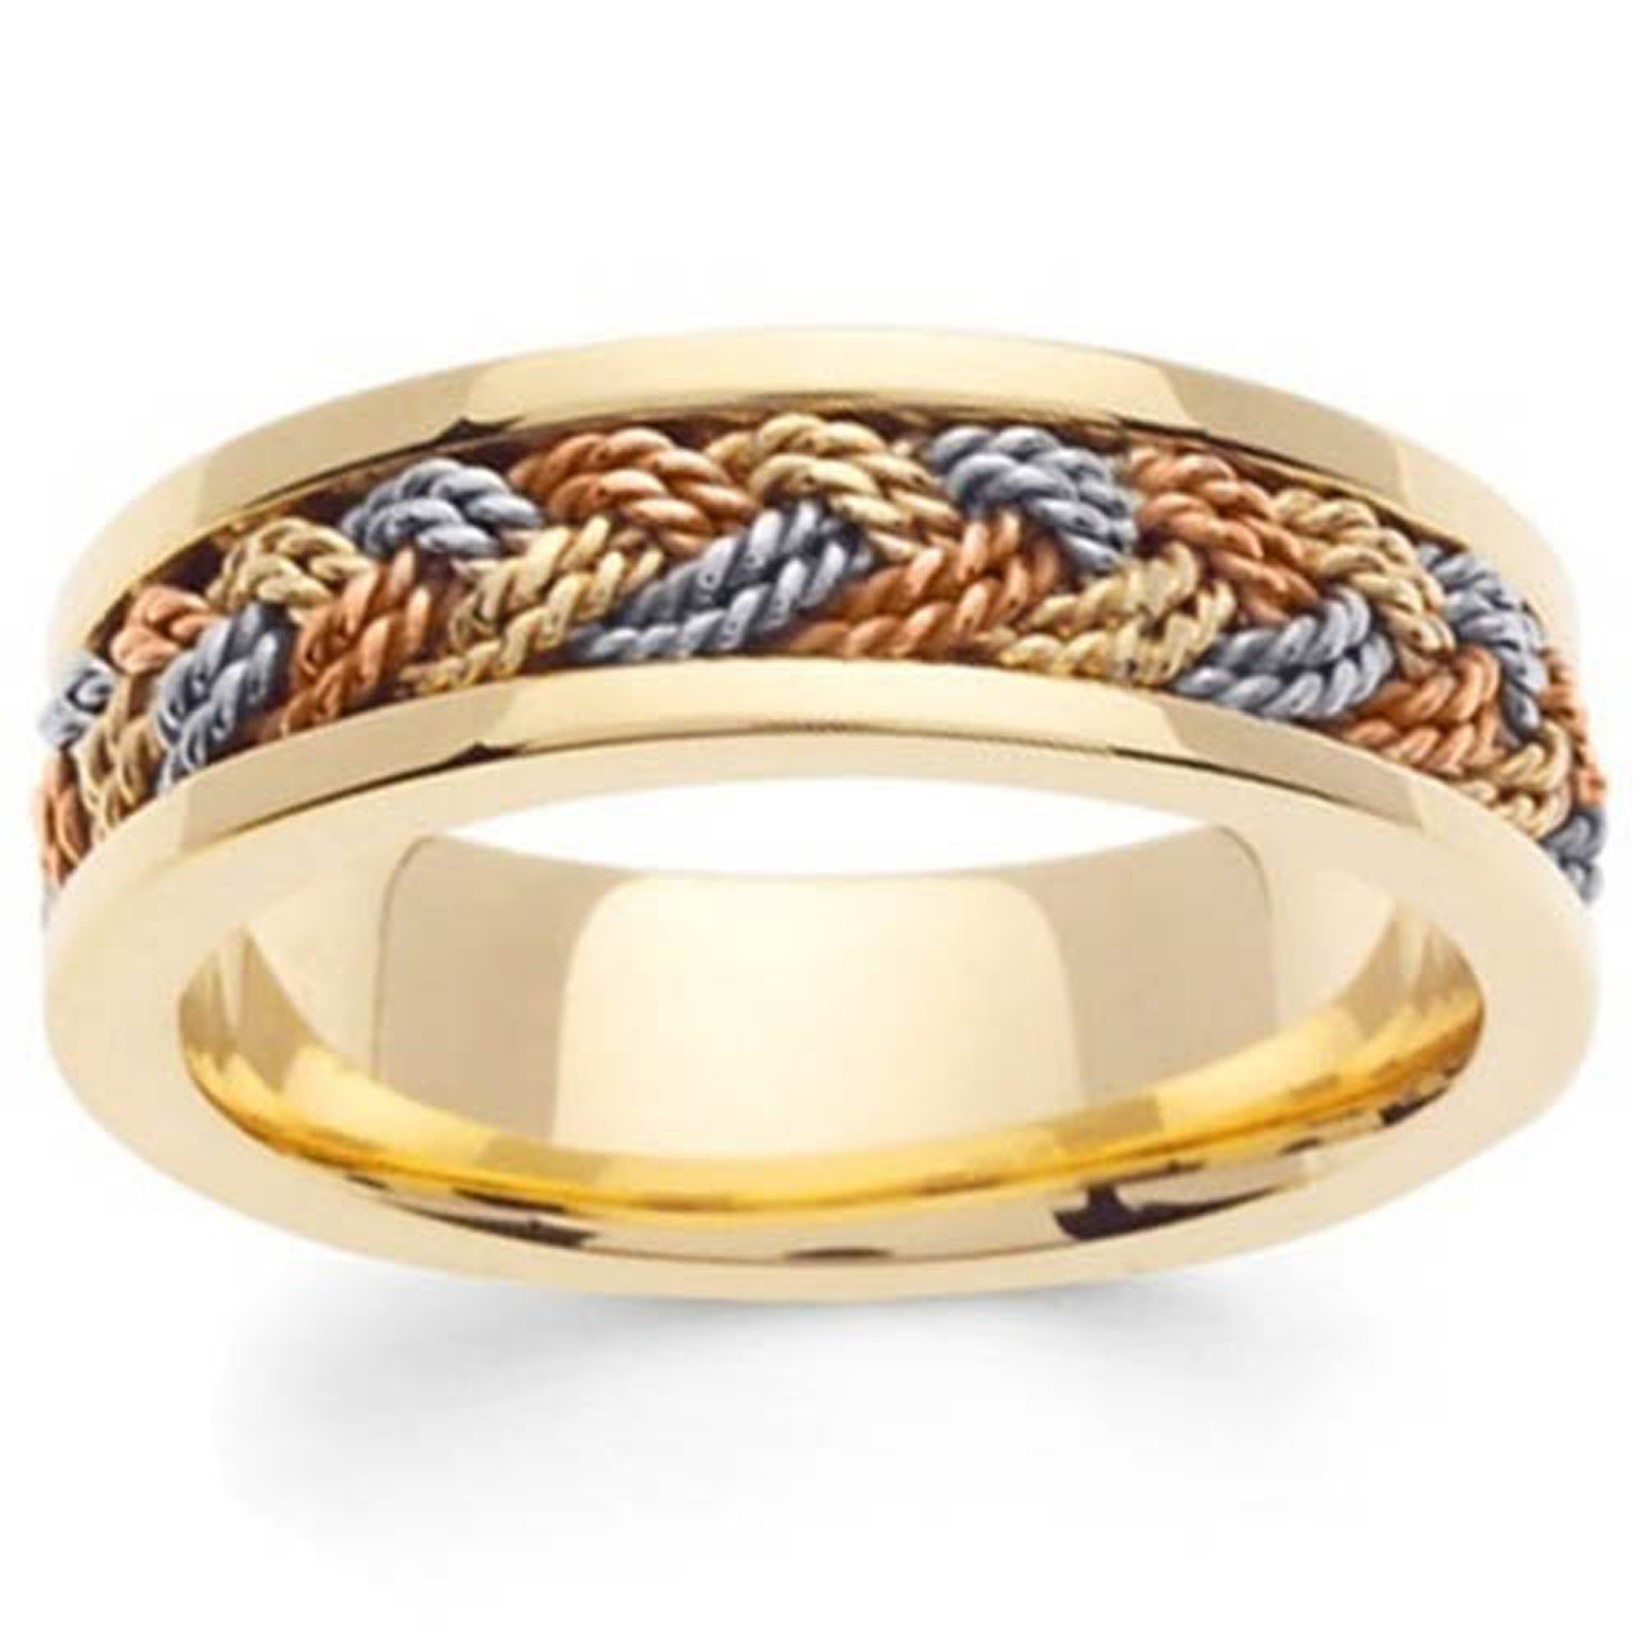 Men's Yellow IP Ring with Tricolor Braid Jewelry Rings